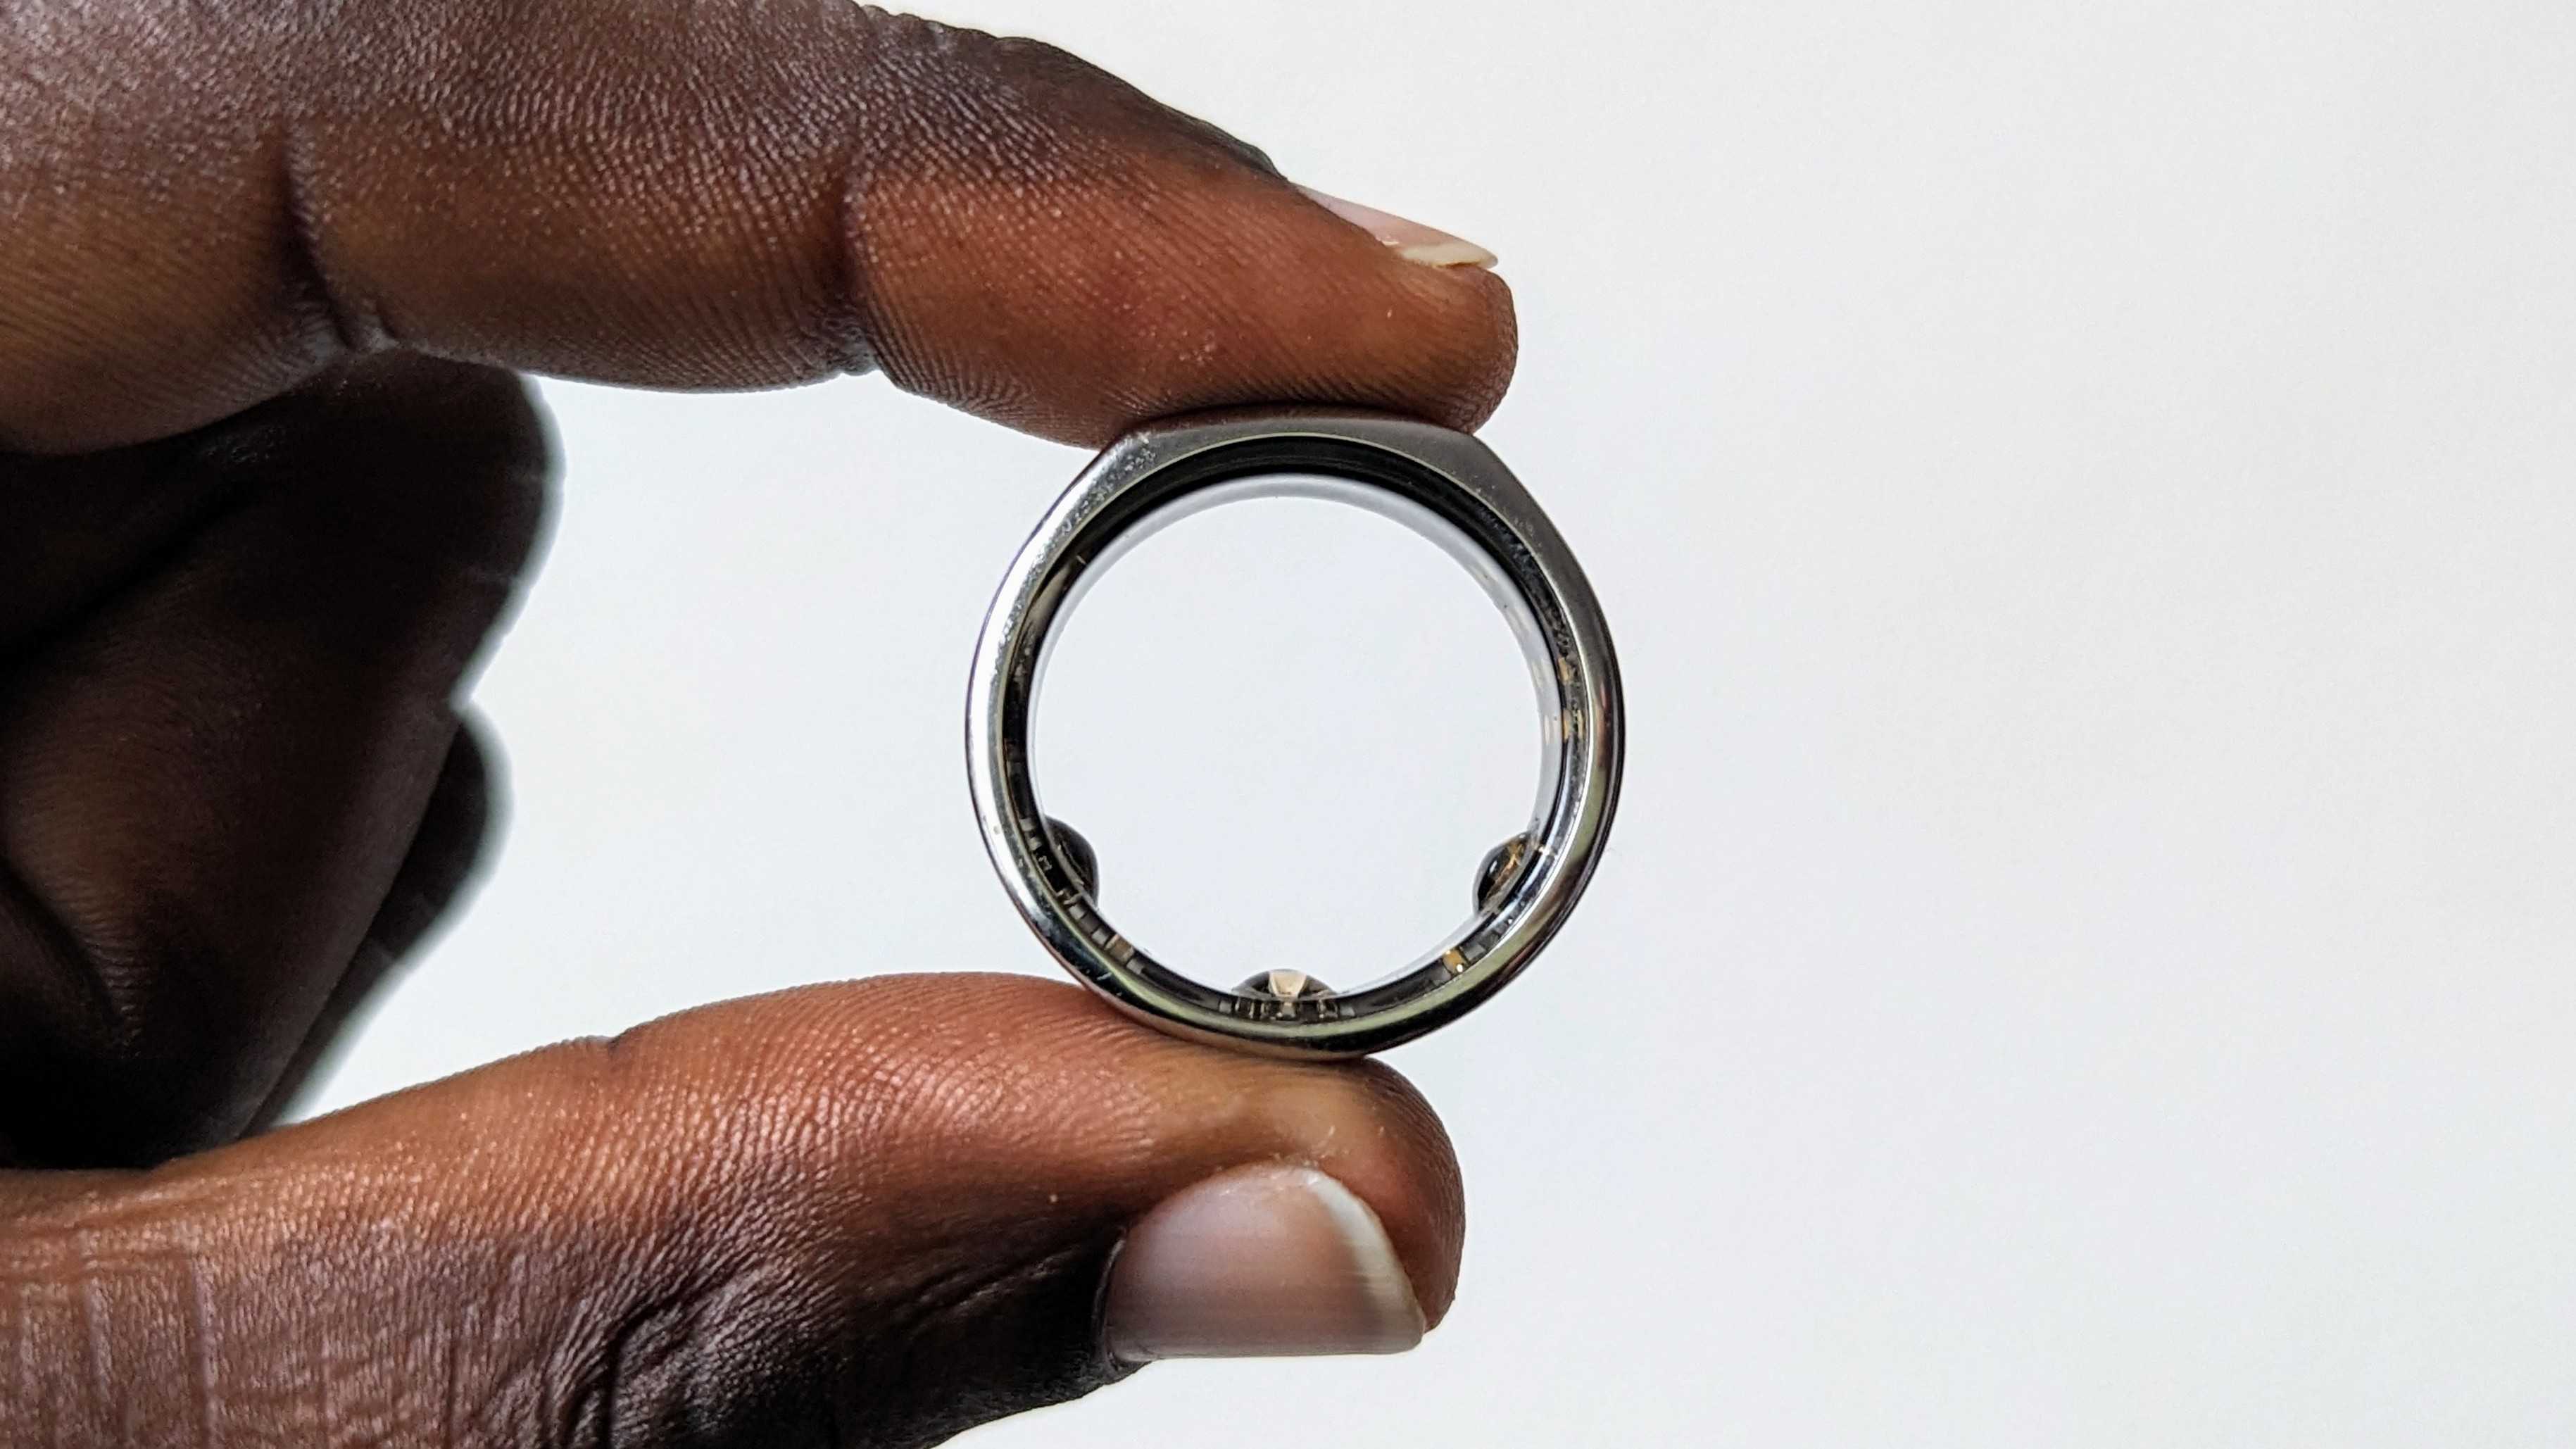 A Samsung or Google smart ring could be interesting, but not many are convinced